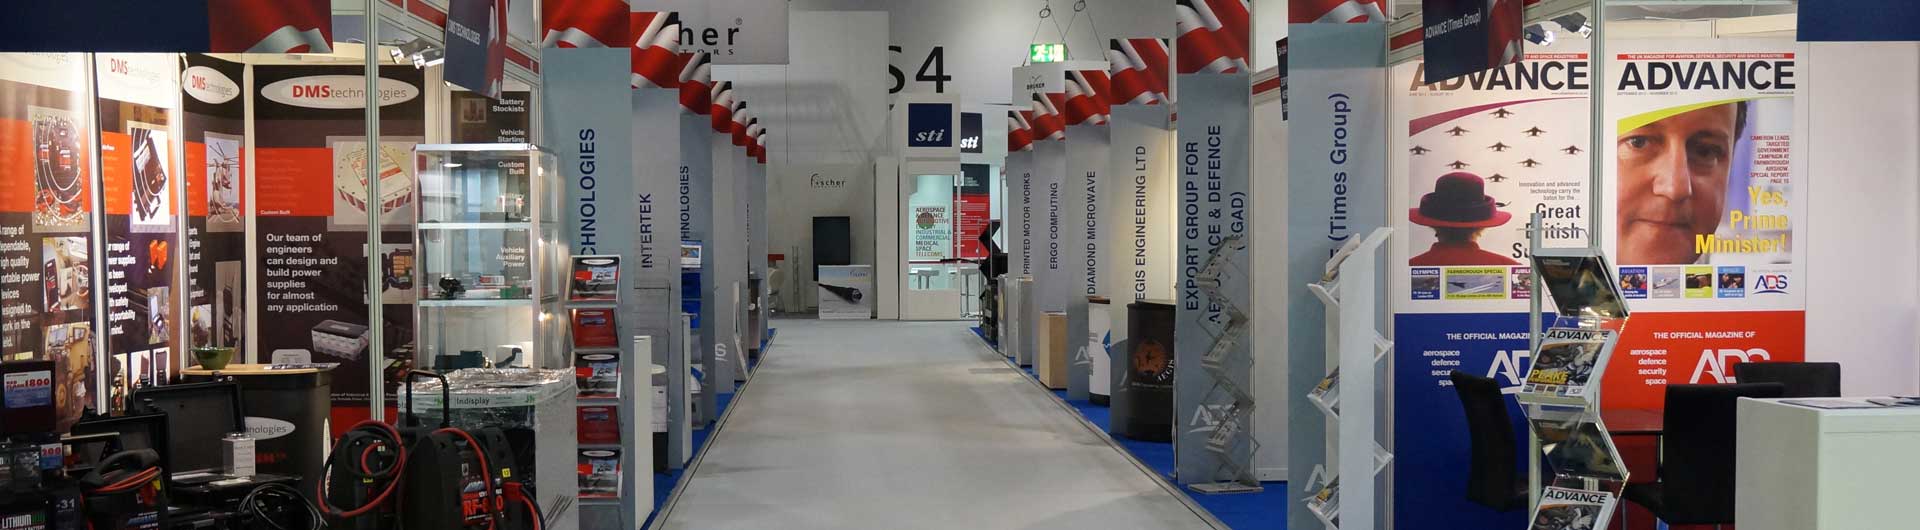 NF-x Installed Exhibition Stand
 Image